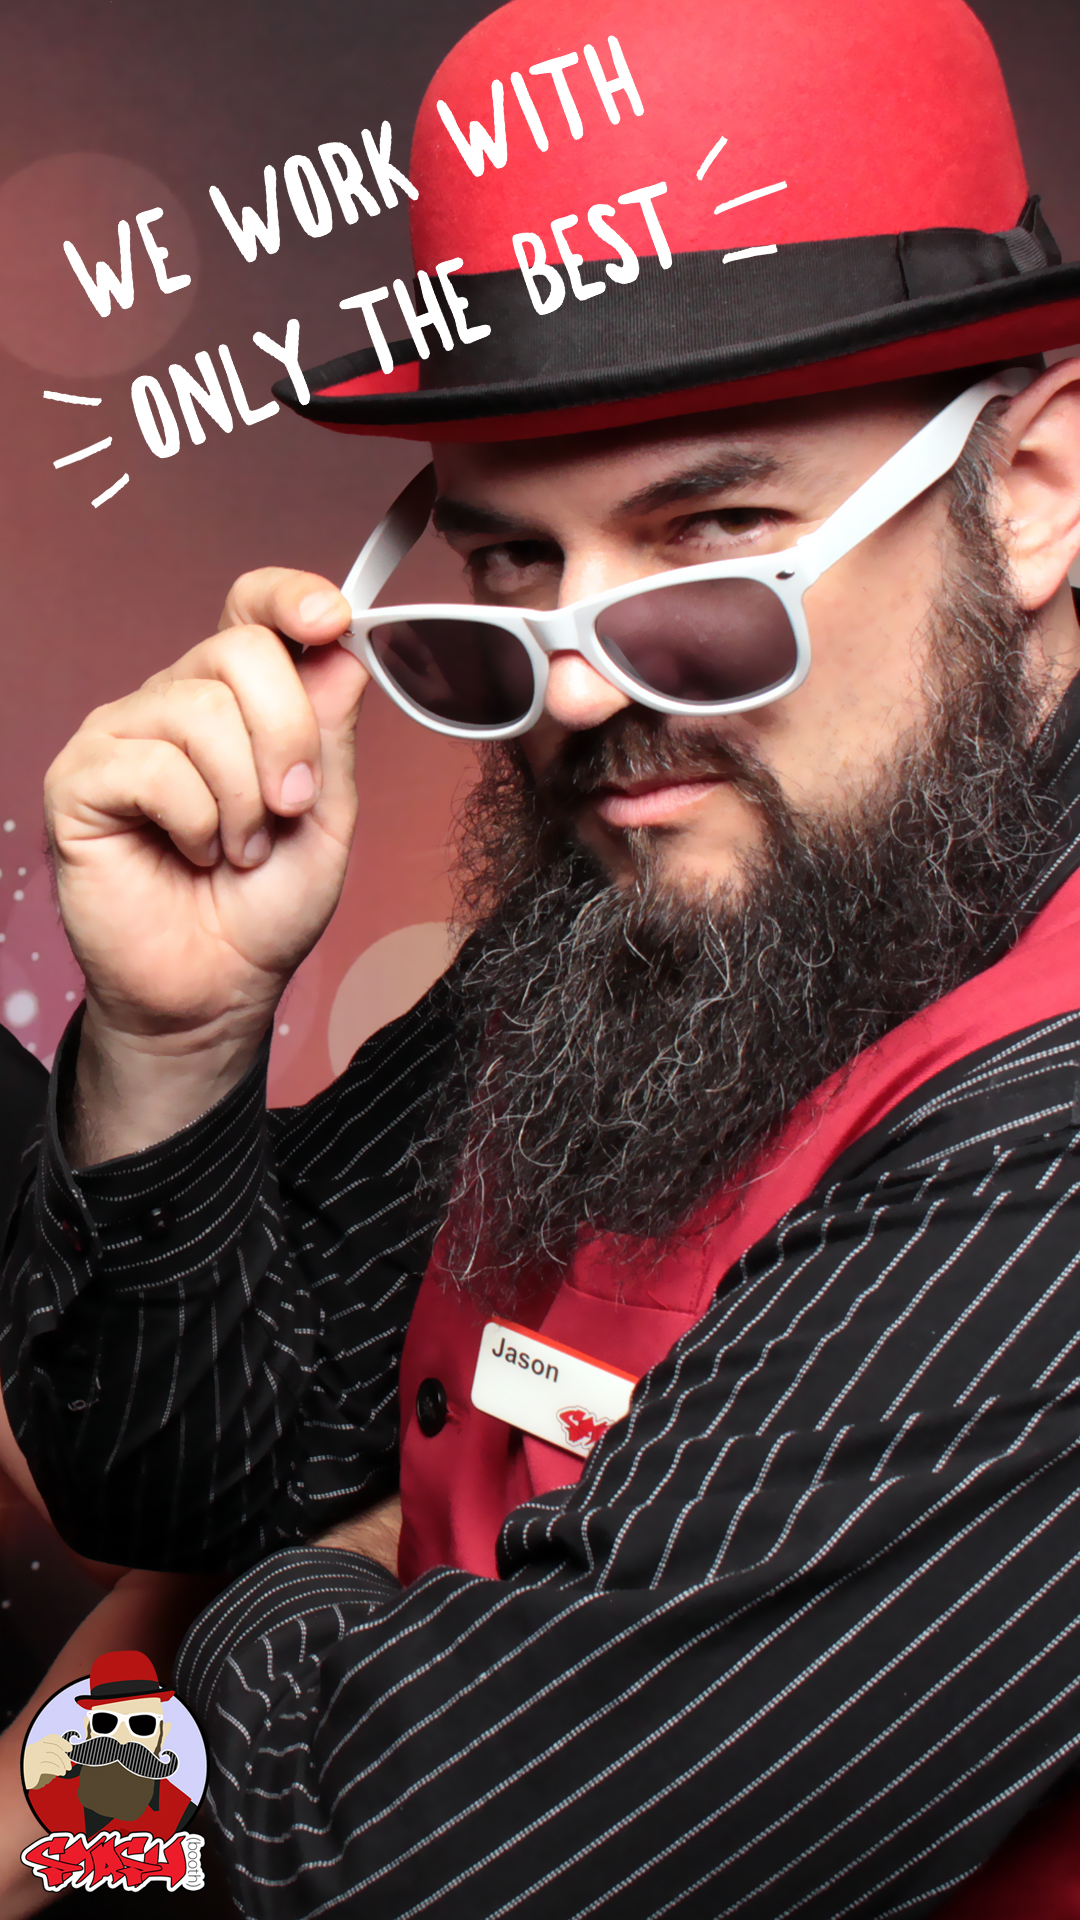 Smashbooth employee in red vest wearing sunglasses